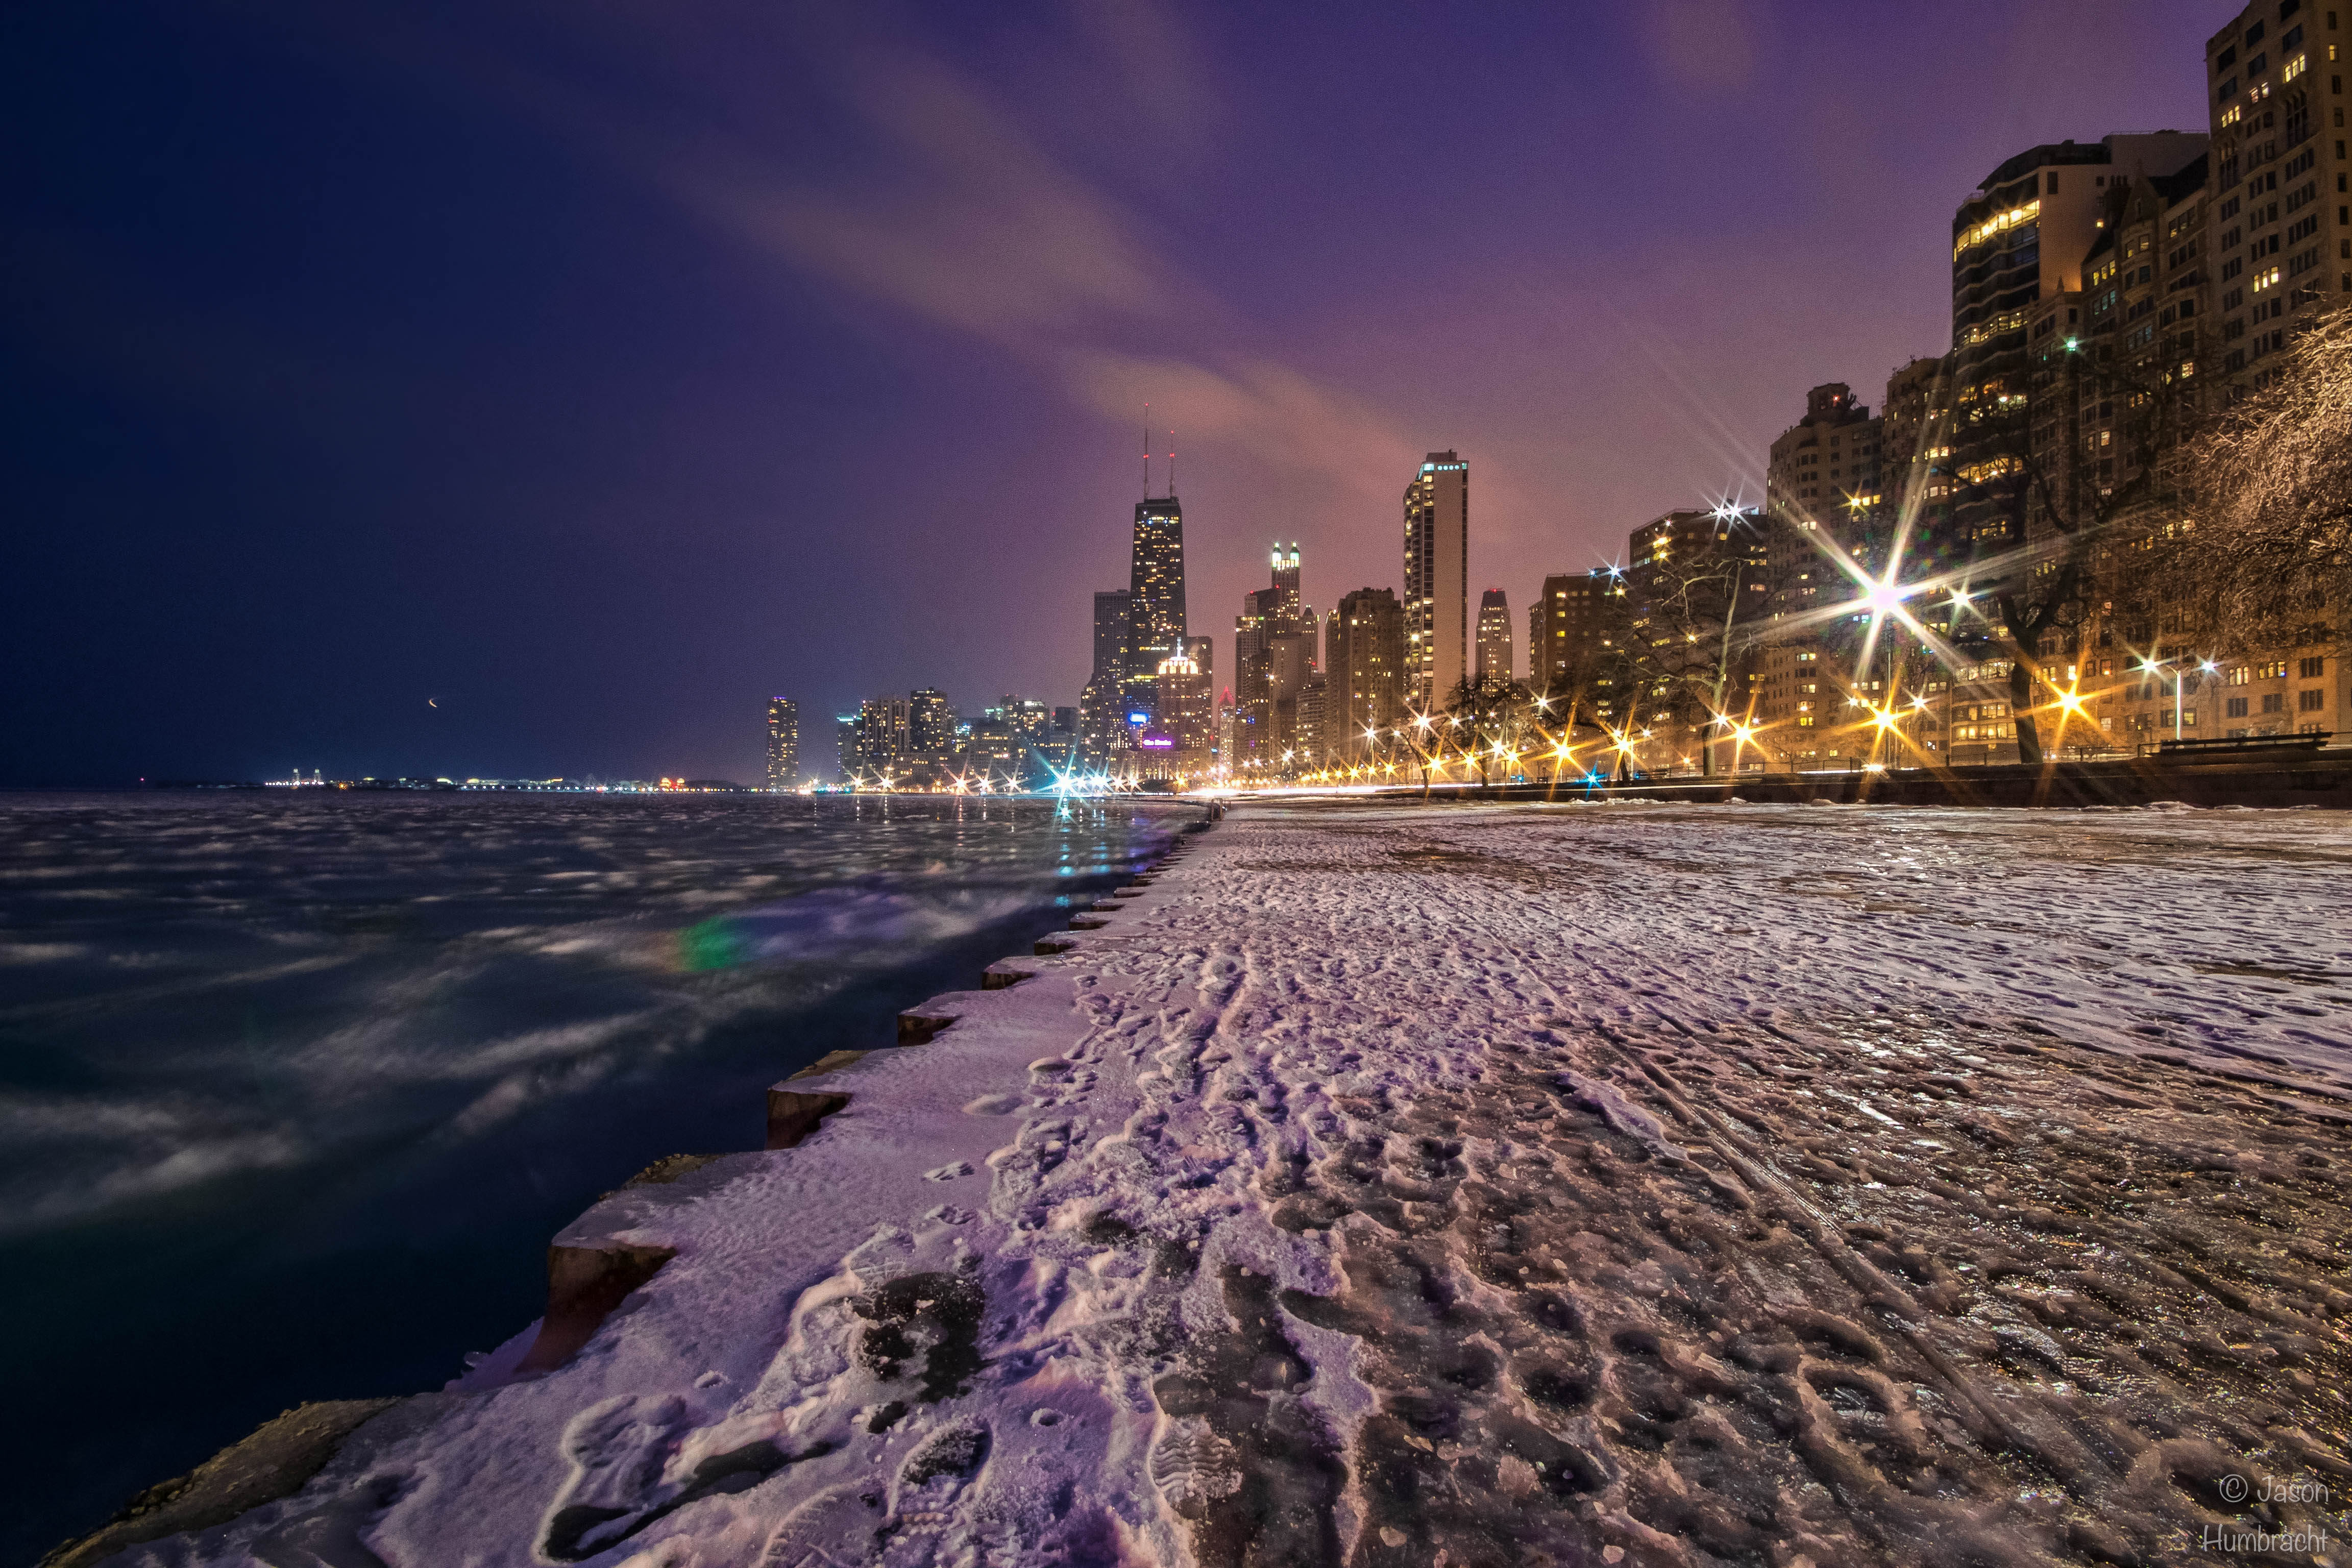 Chicago Skyline At Night | Chicago Architecture | Image By Indiana Architectural Photographer Jason Humbracht